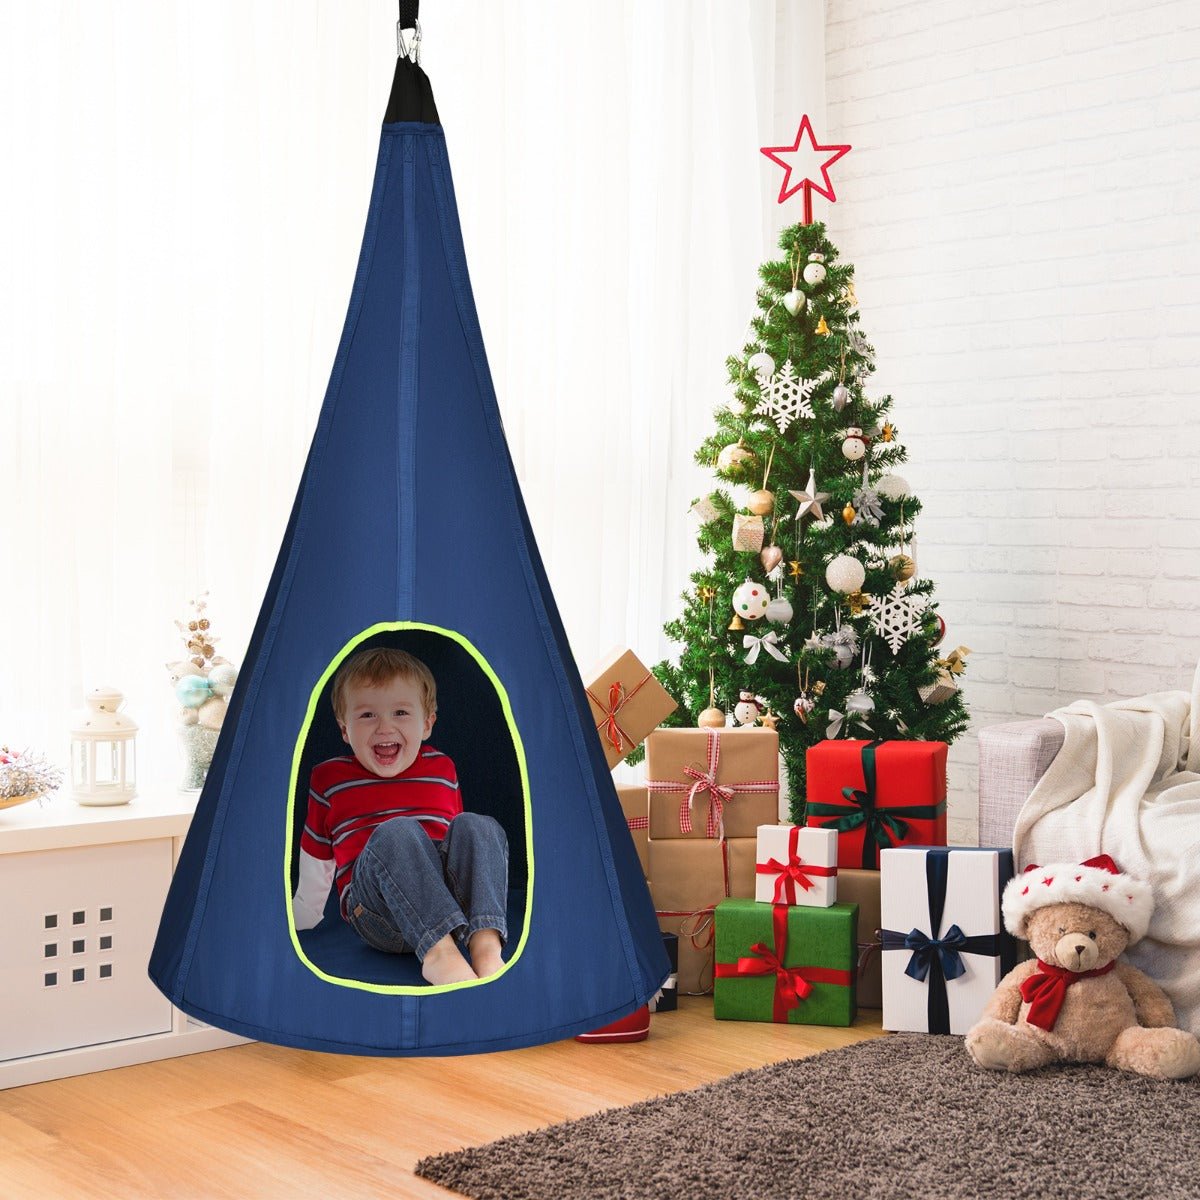 Cloud of Comfort: Kids Nest Swing Tent Blue 80cm, Relax and Swing Away